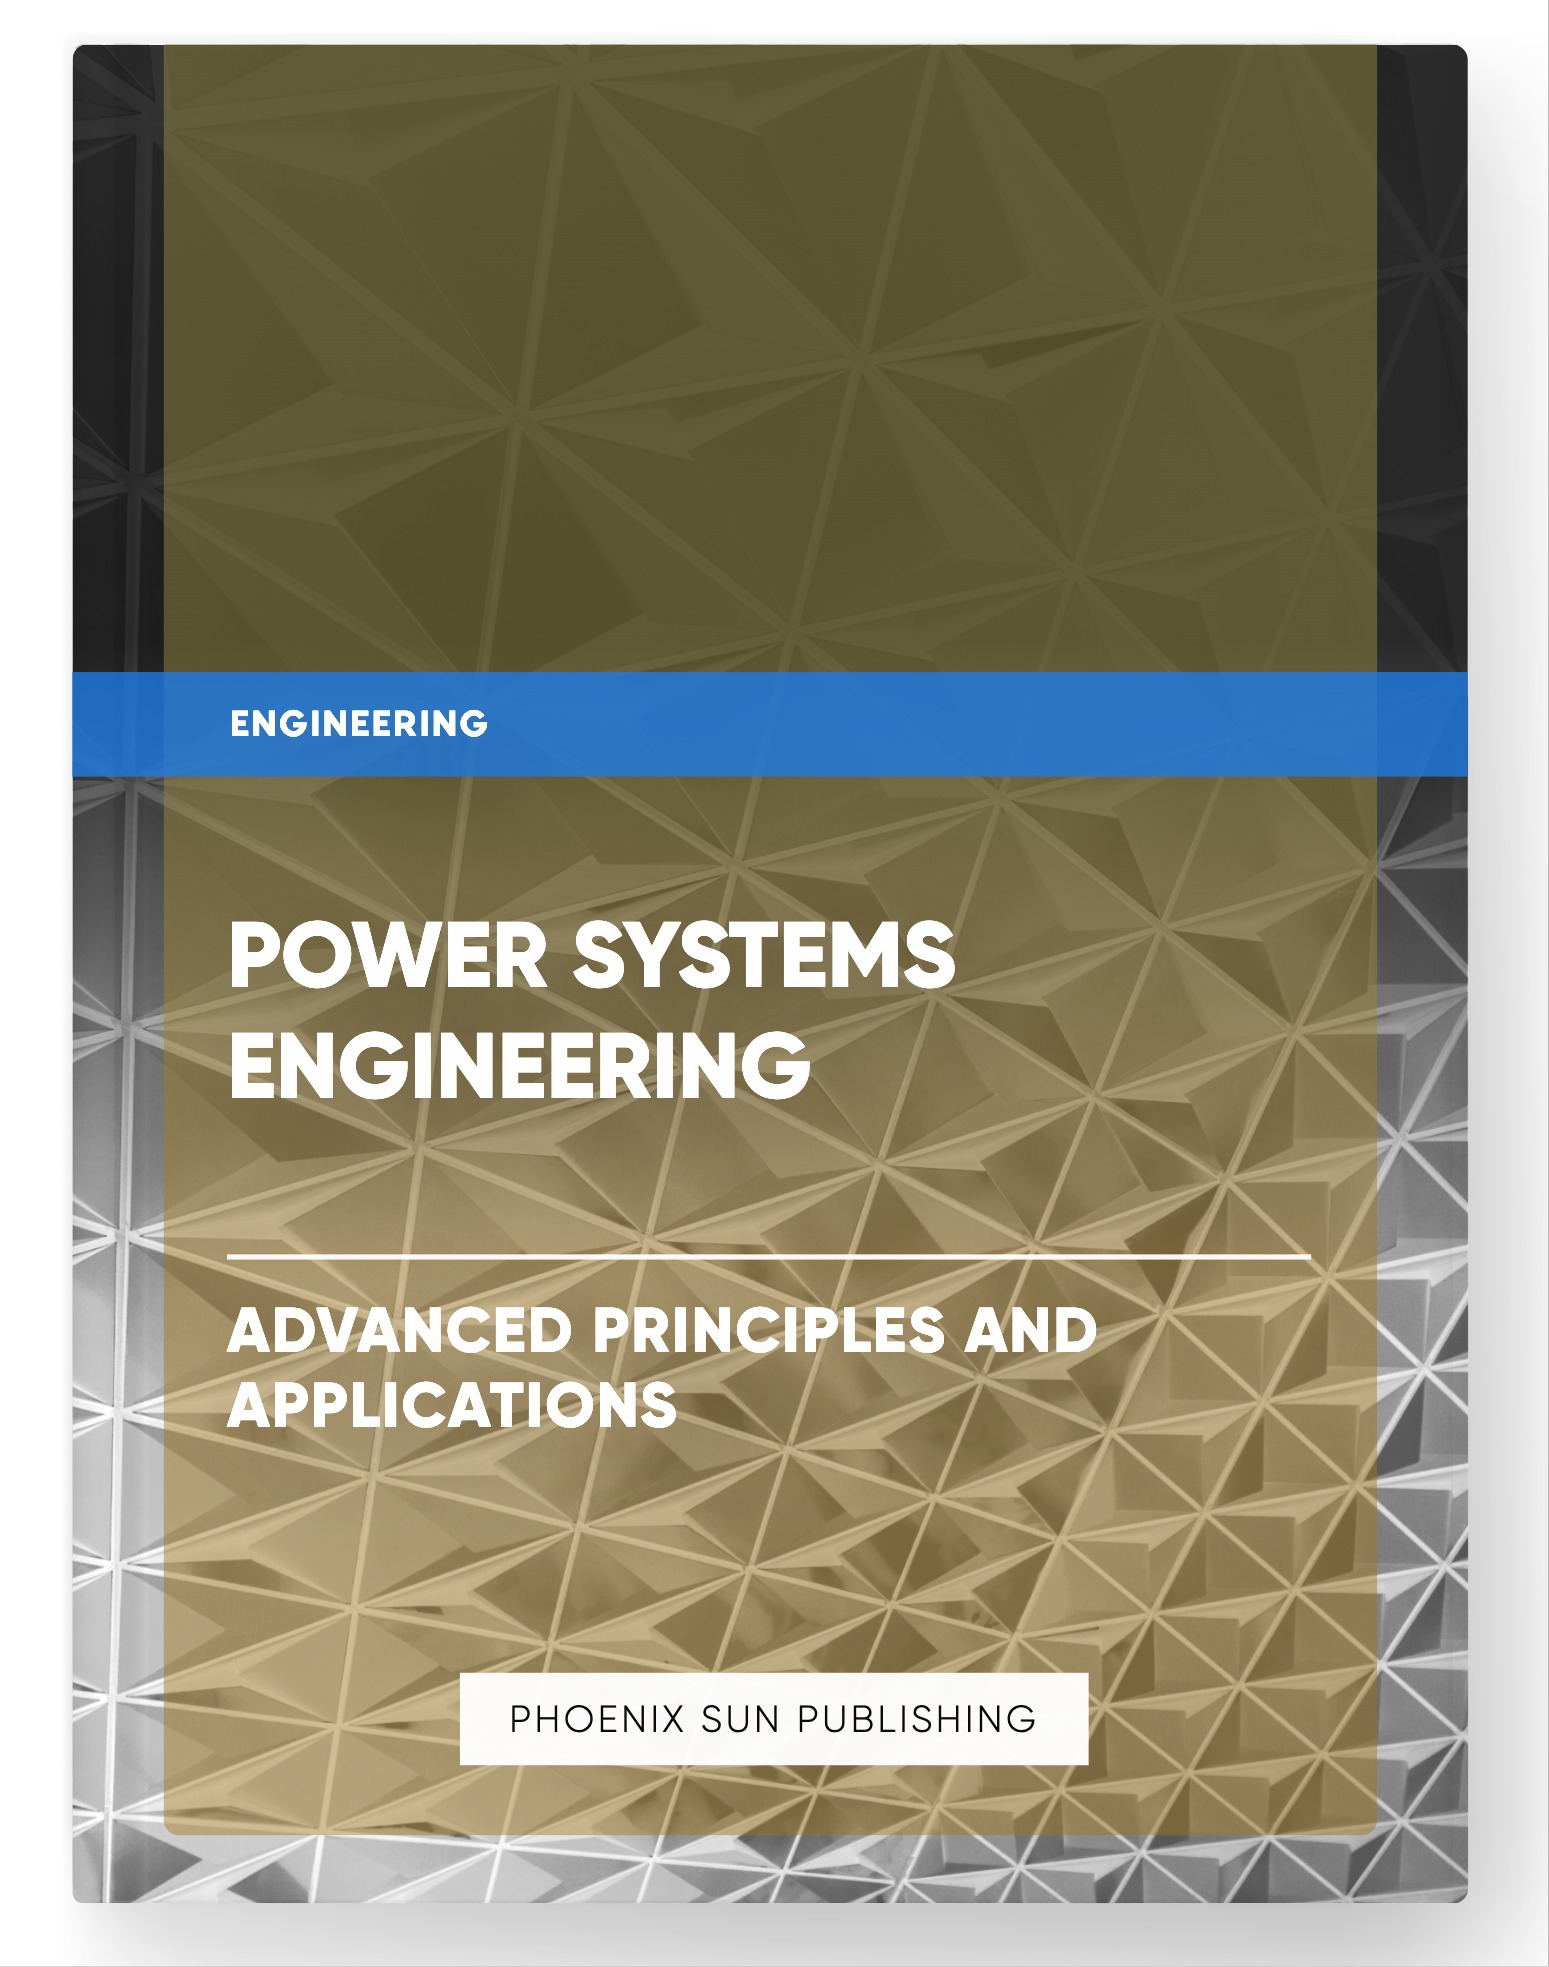 Power Systems Engineering – Advanced Principles and Applications